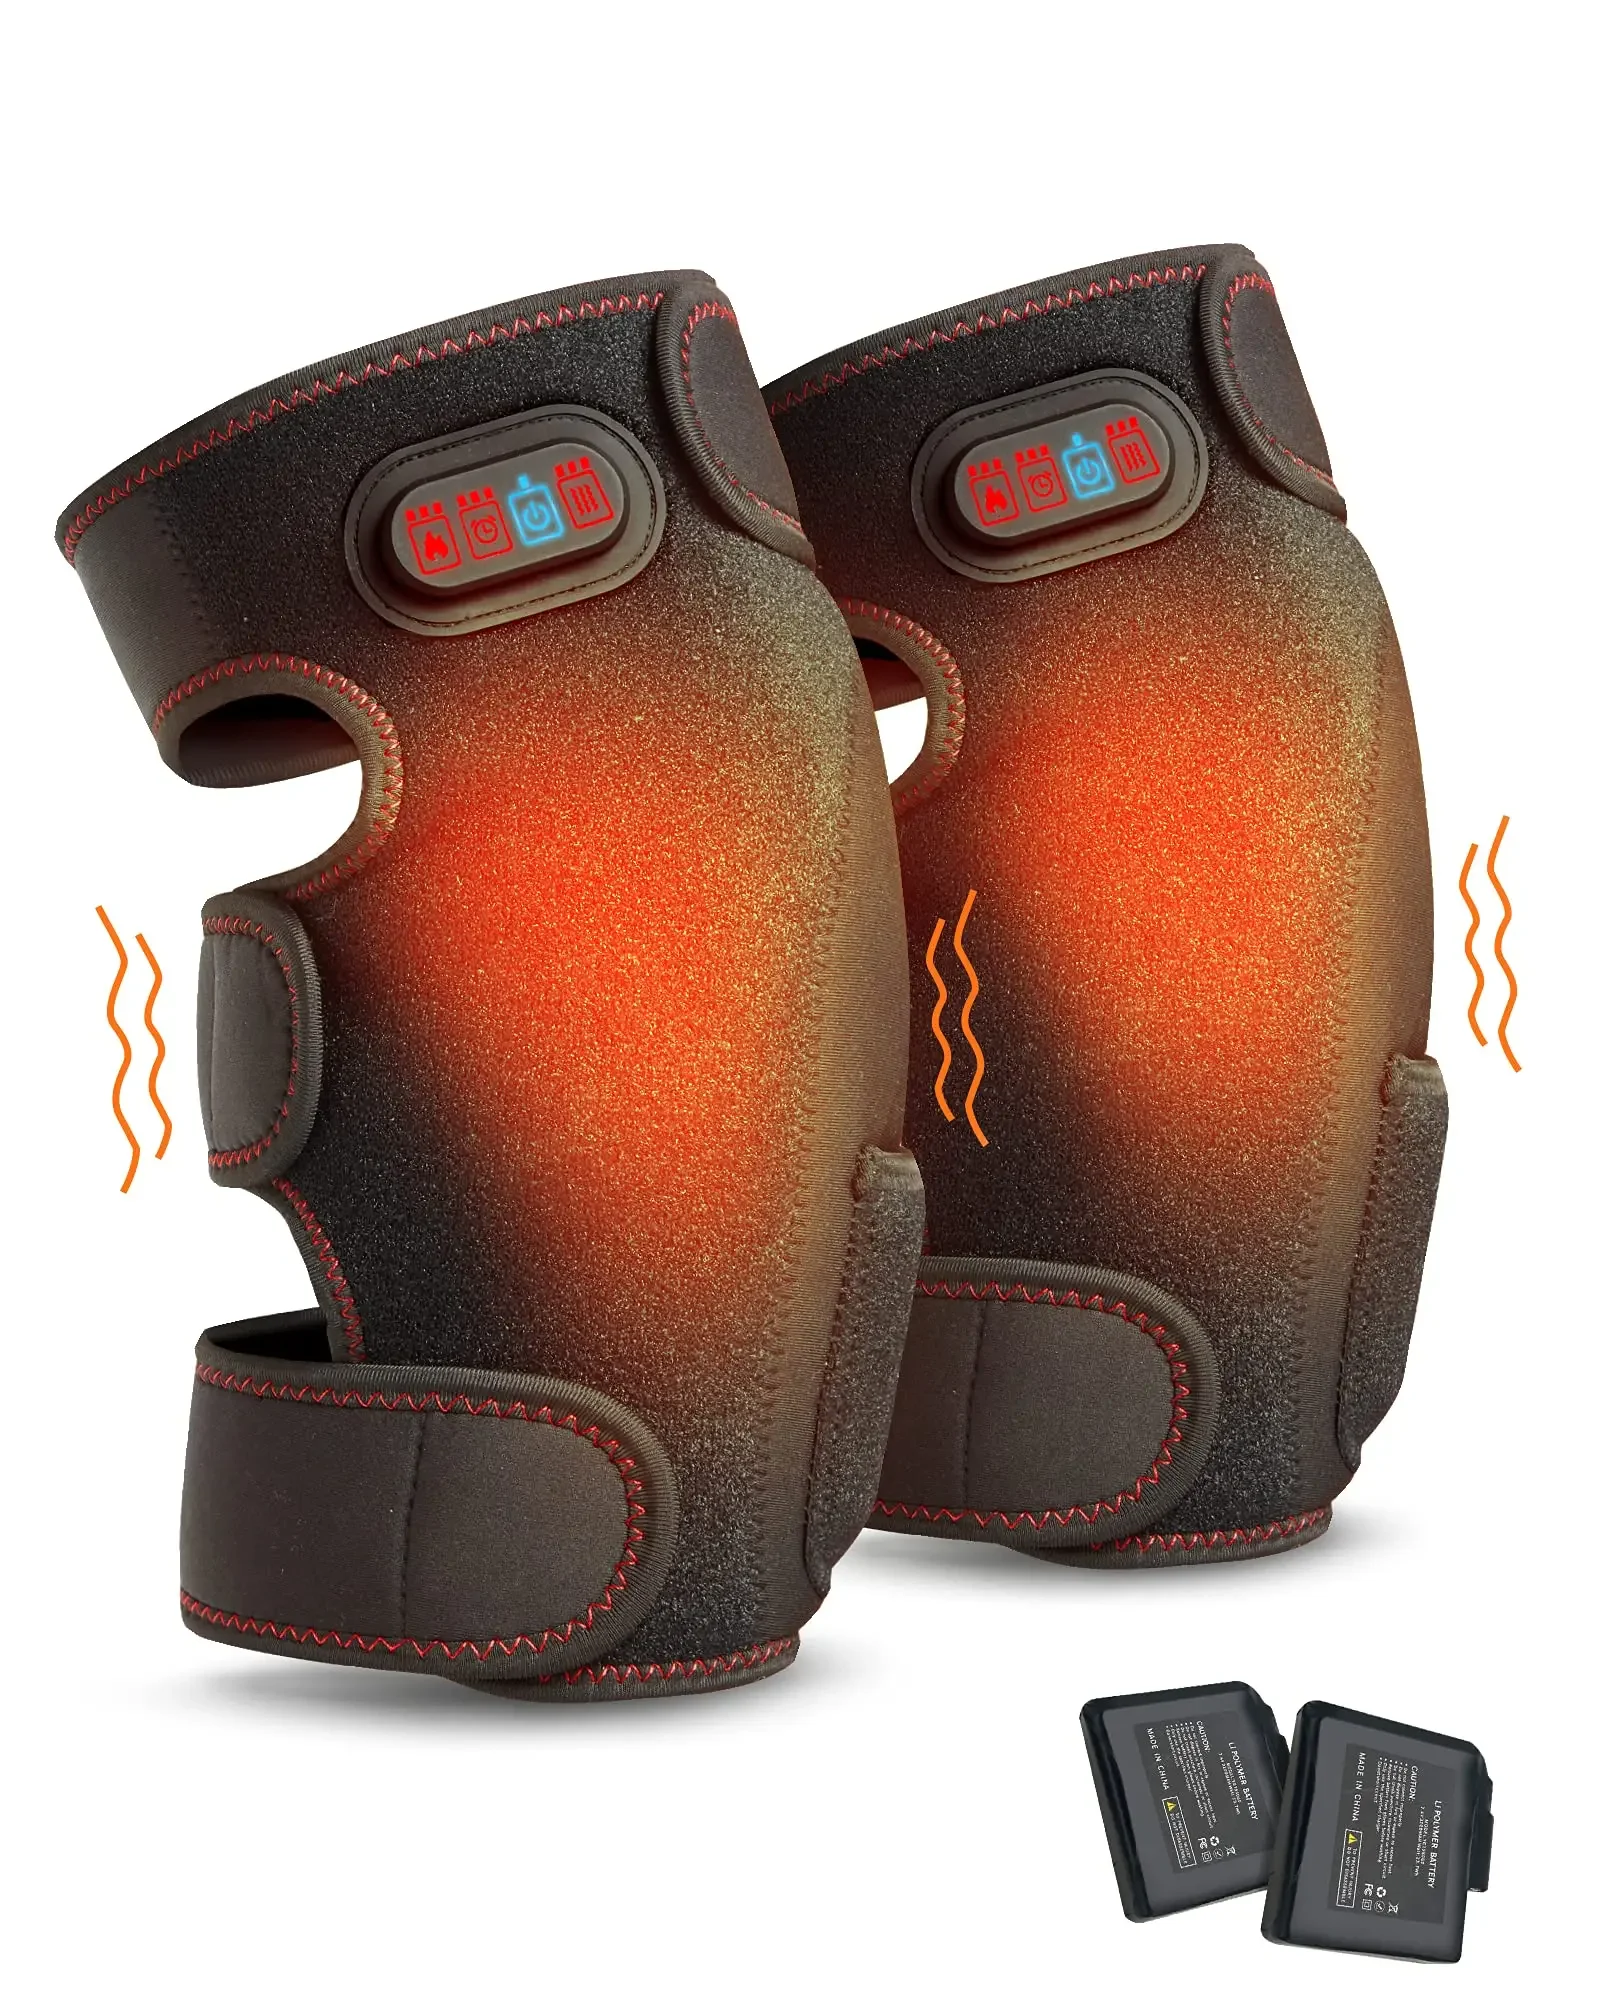 Heated Knee Brace Wrap - Battery Powered Knee Heating Pad Vibration Massager for Knee Pain Relief (1 Pair) electric battery heated gloves waterproof winter gloves heating thermal gloves